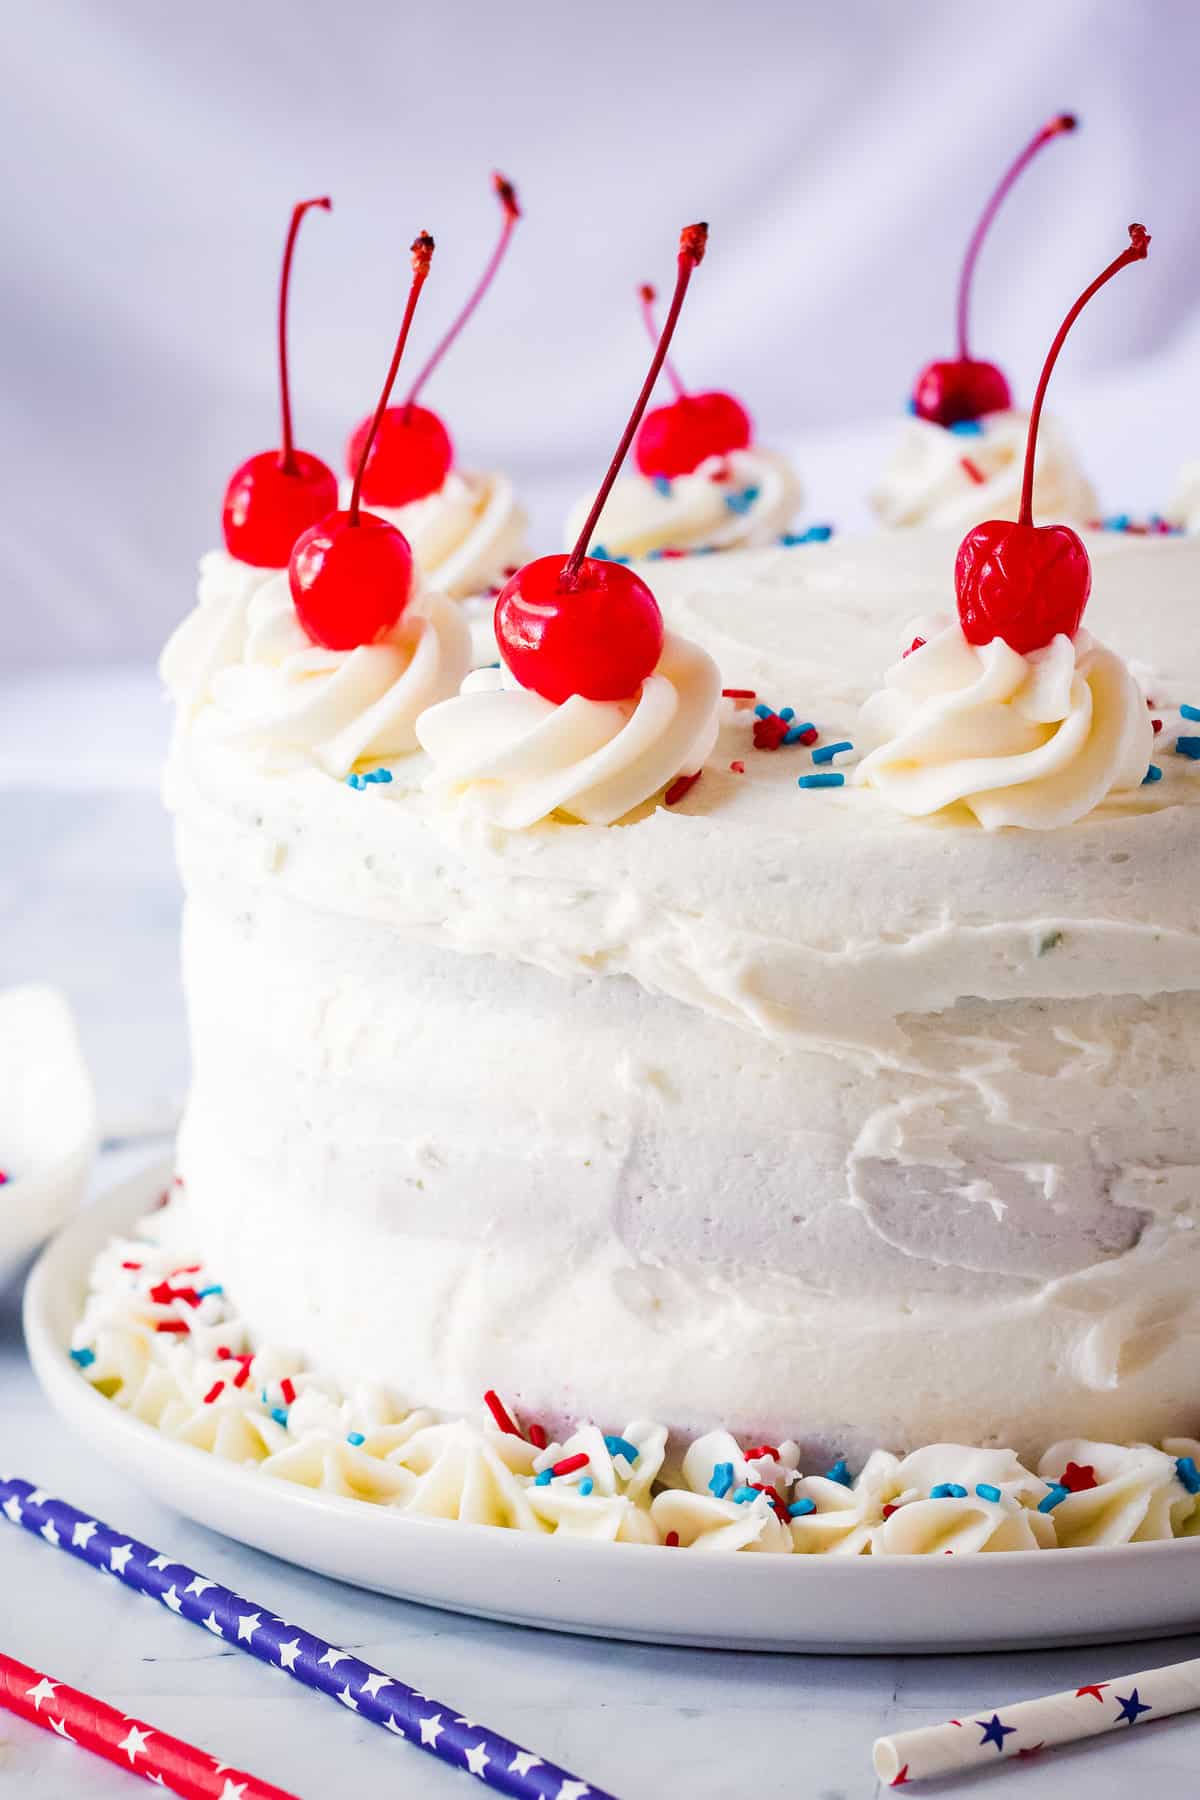 Two tiered cake with cherries, patriotic sprinkles and cherries